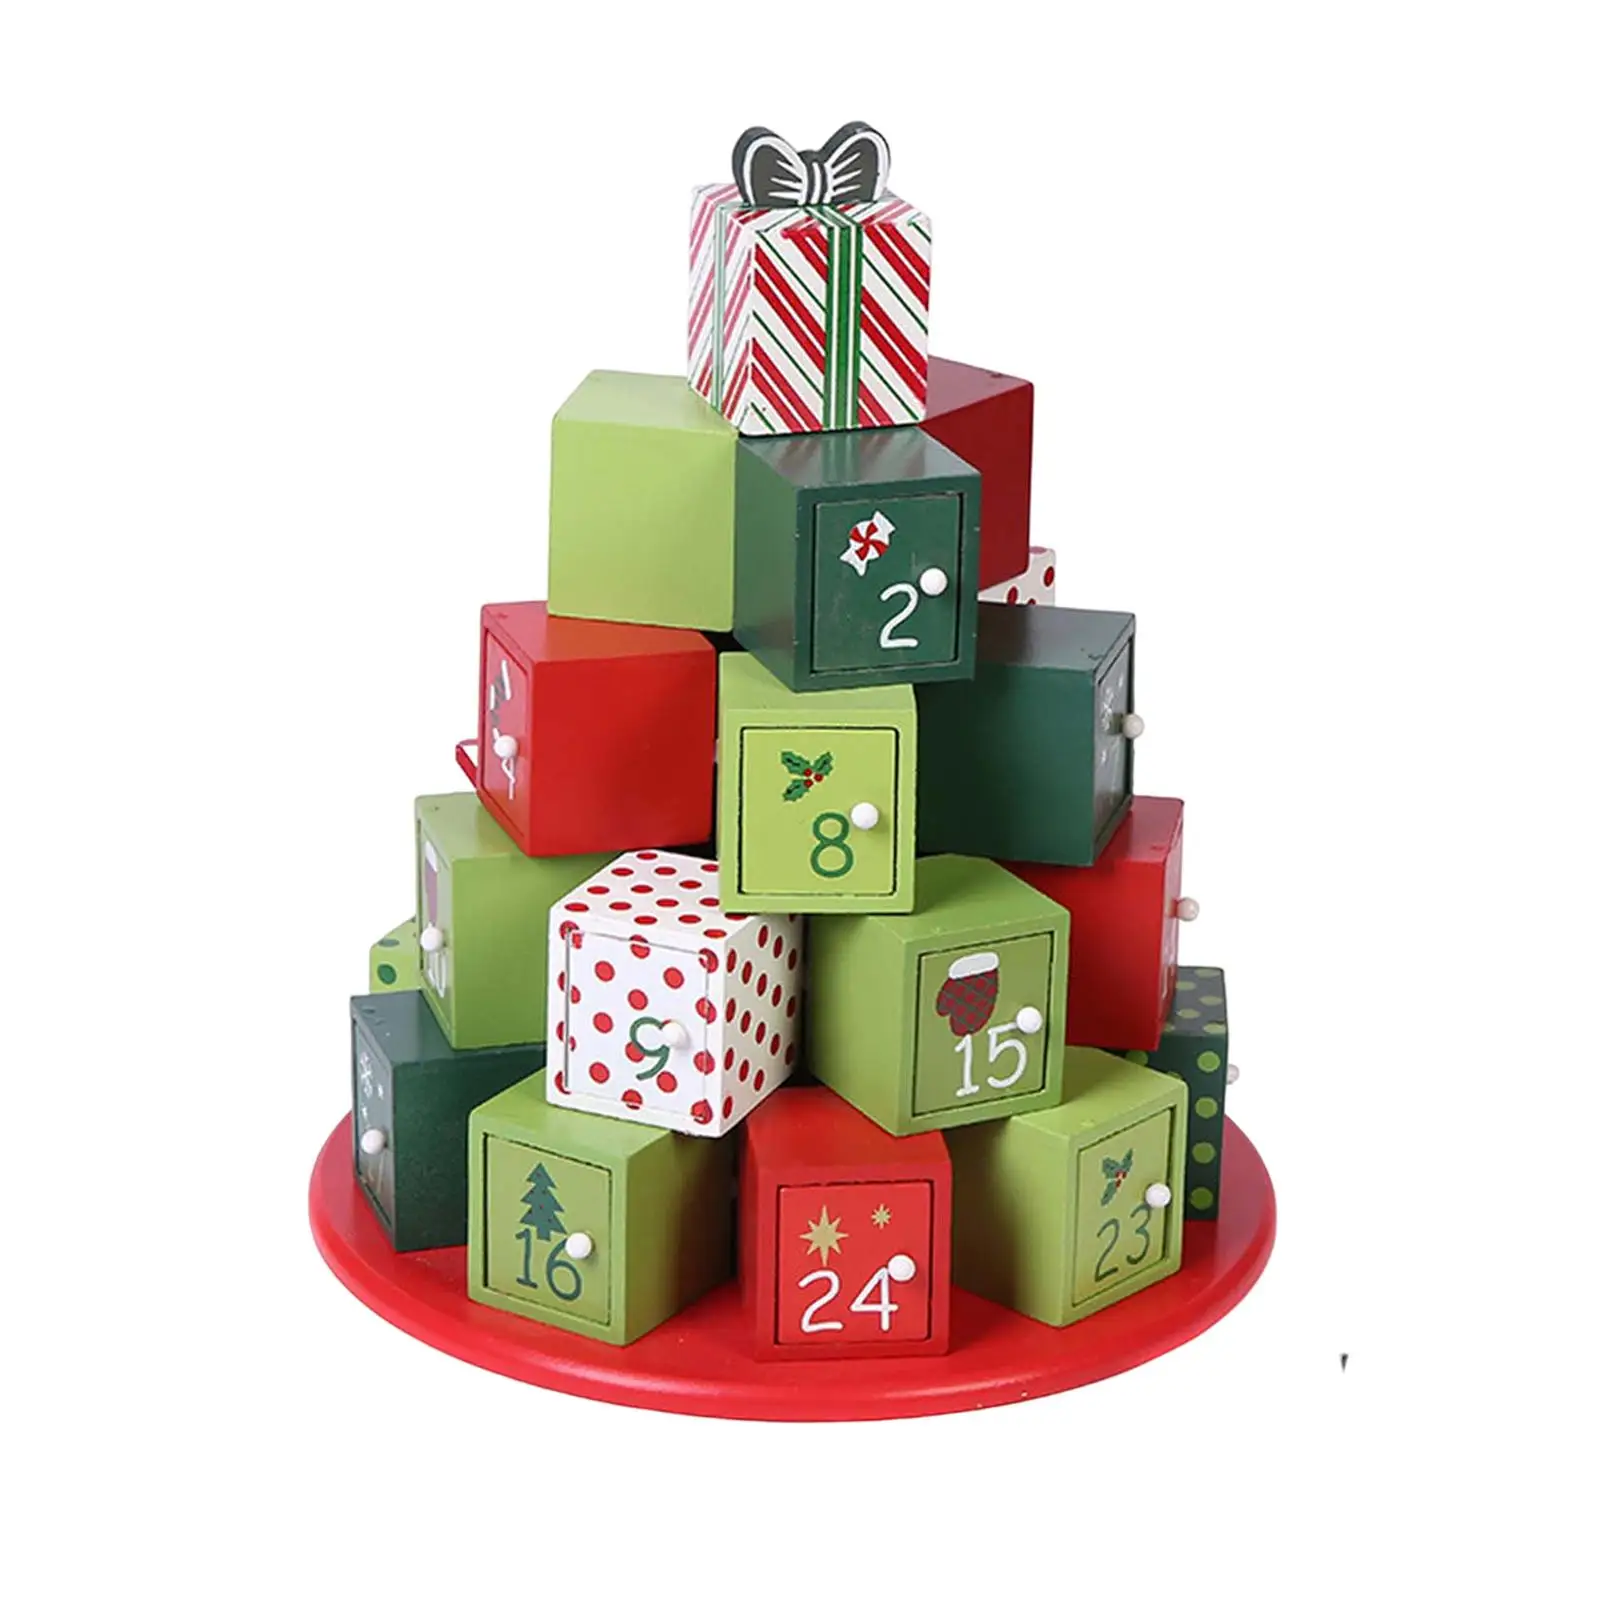 Gift Box Decorations Creative with Drawers Tree Advent Calendar for Shopping Mall Counter Window Bedroom Souvenir